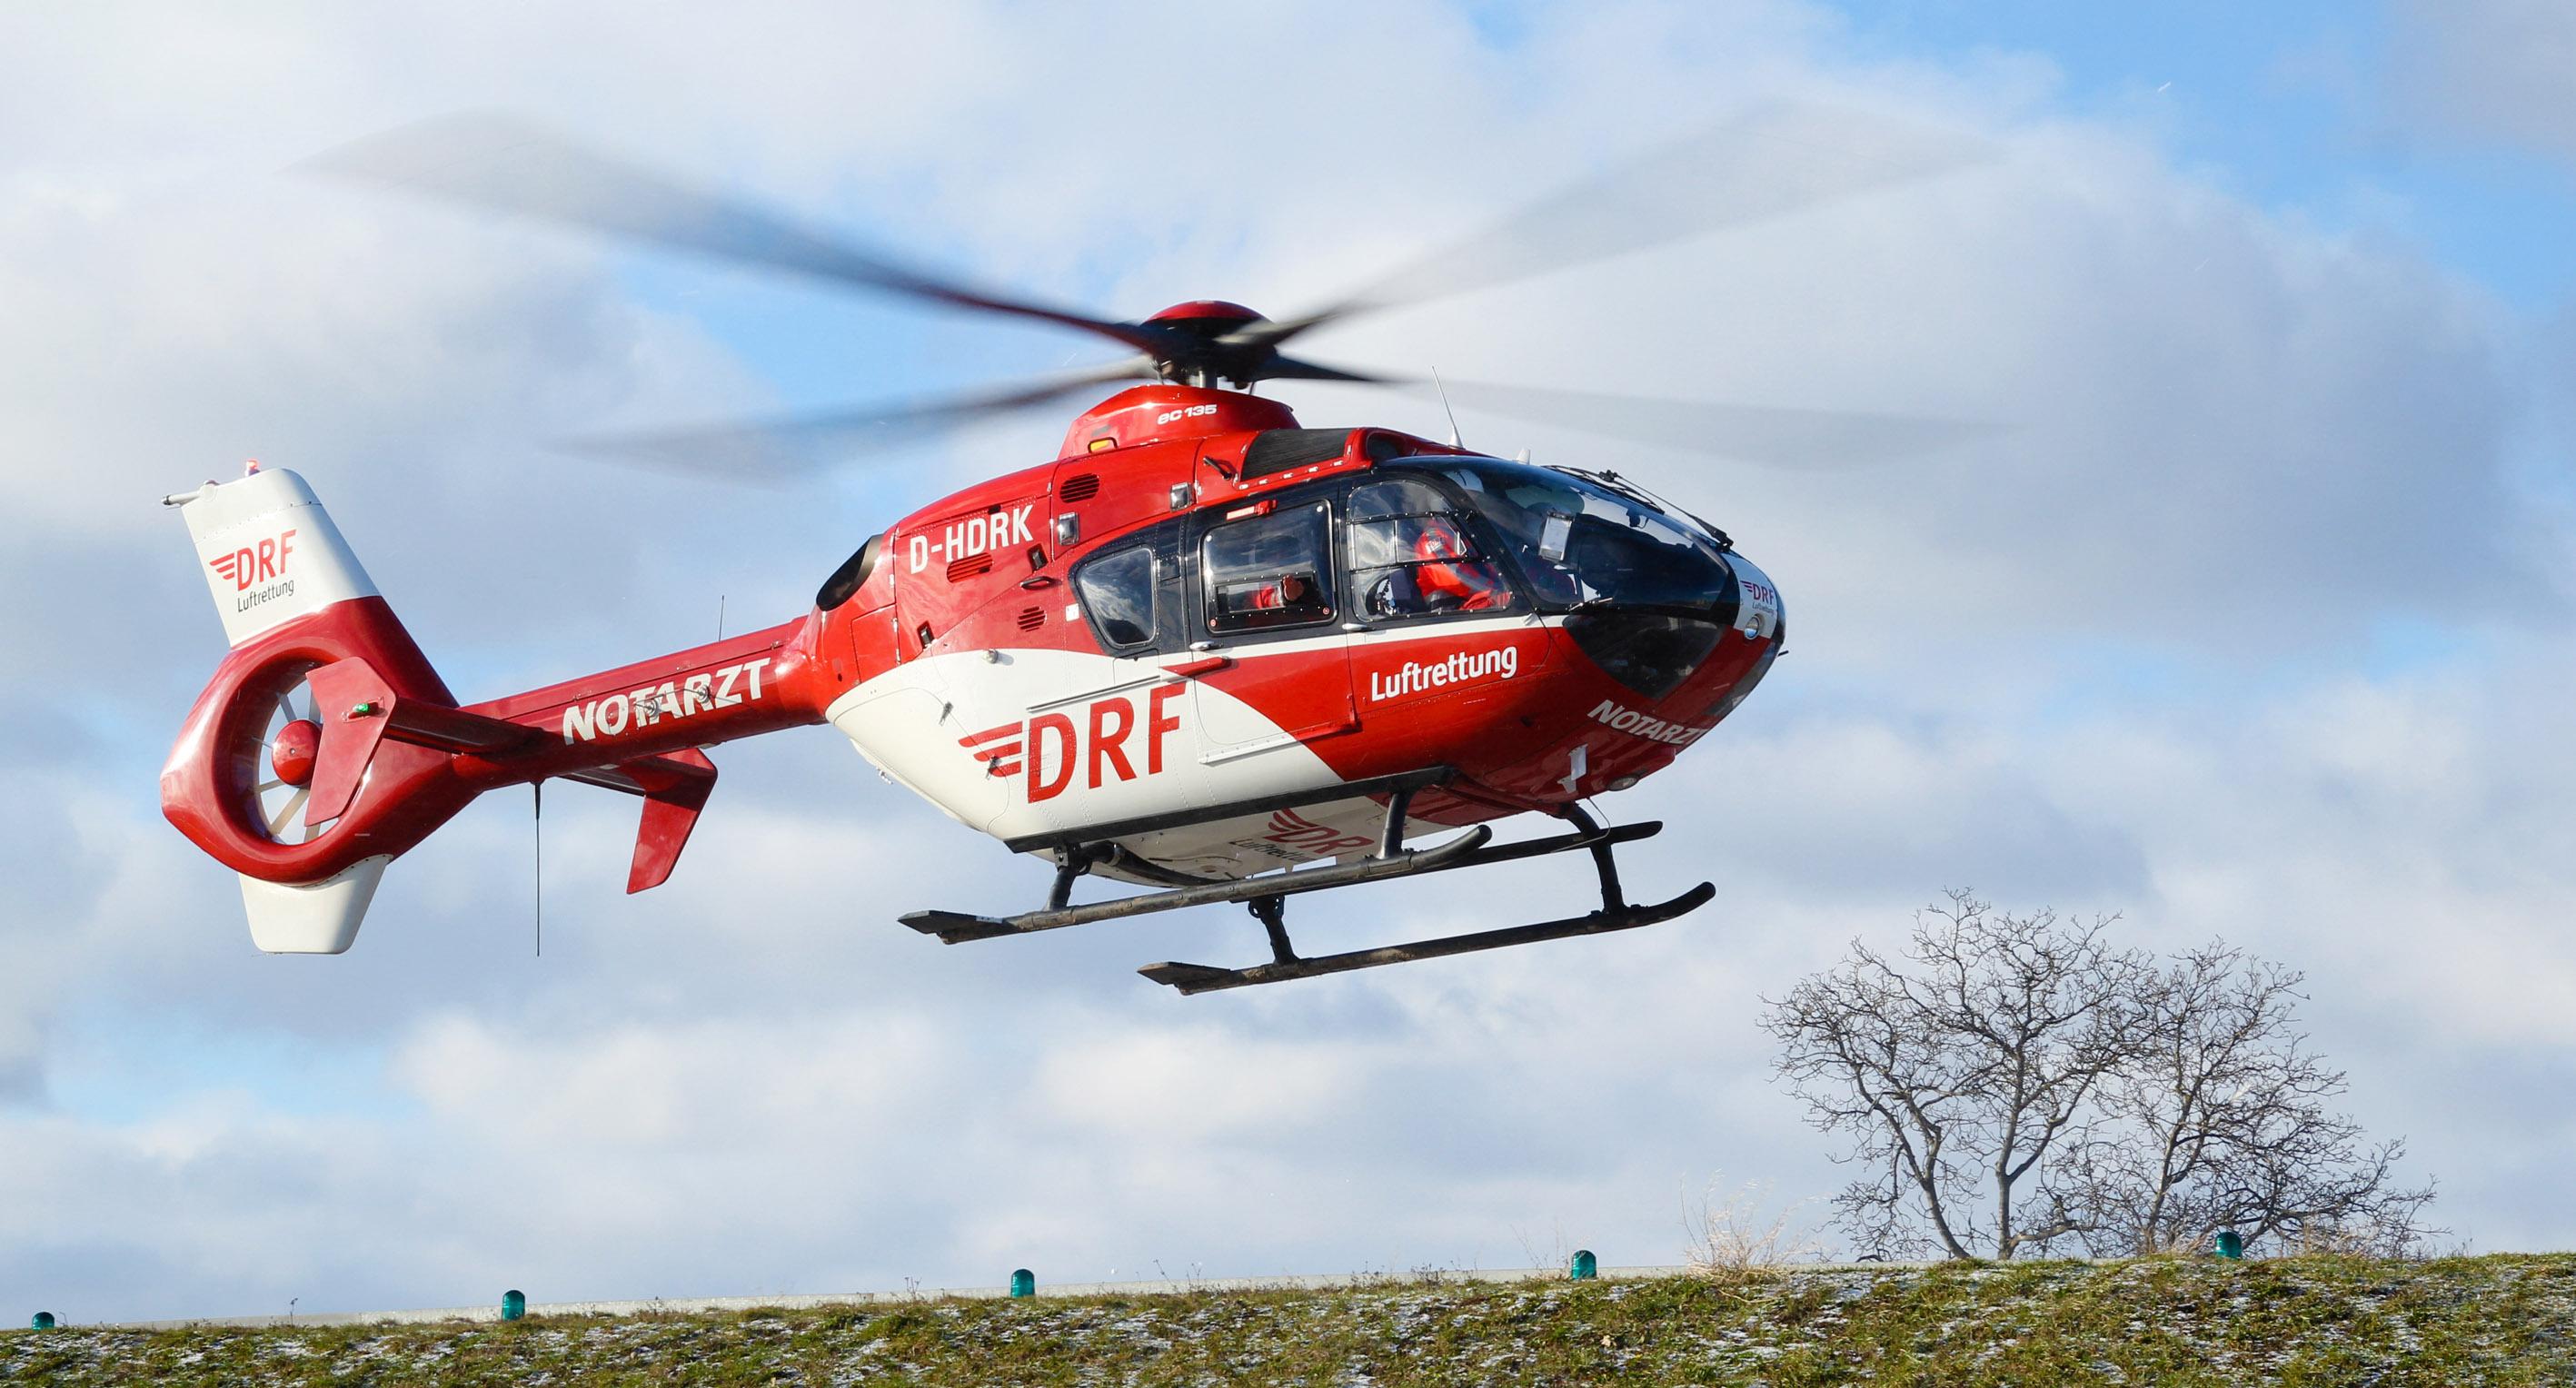 Ec 135 Drf: Available Training Courses for EC 135 DRF